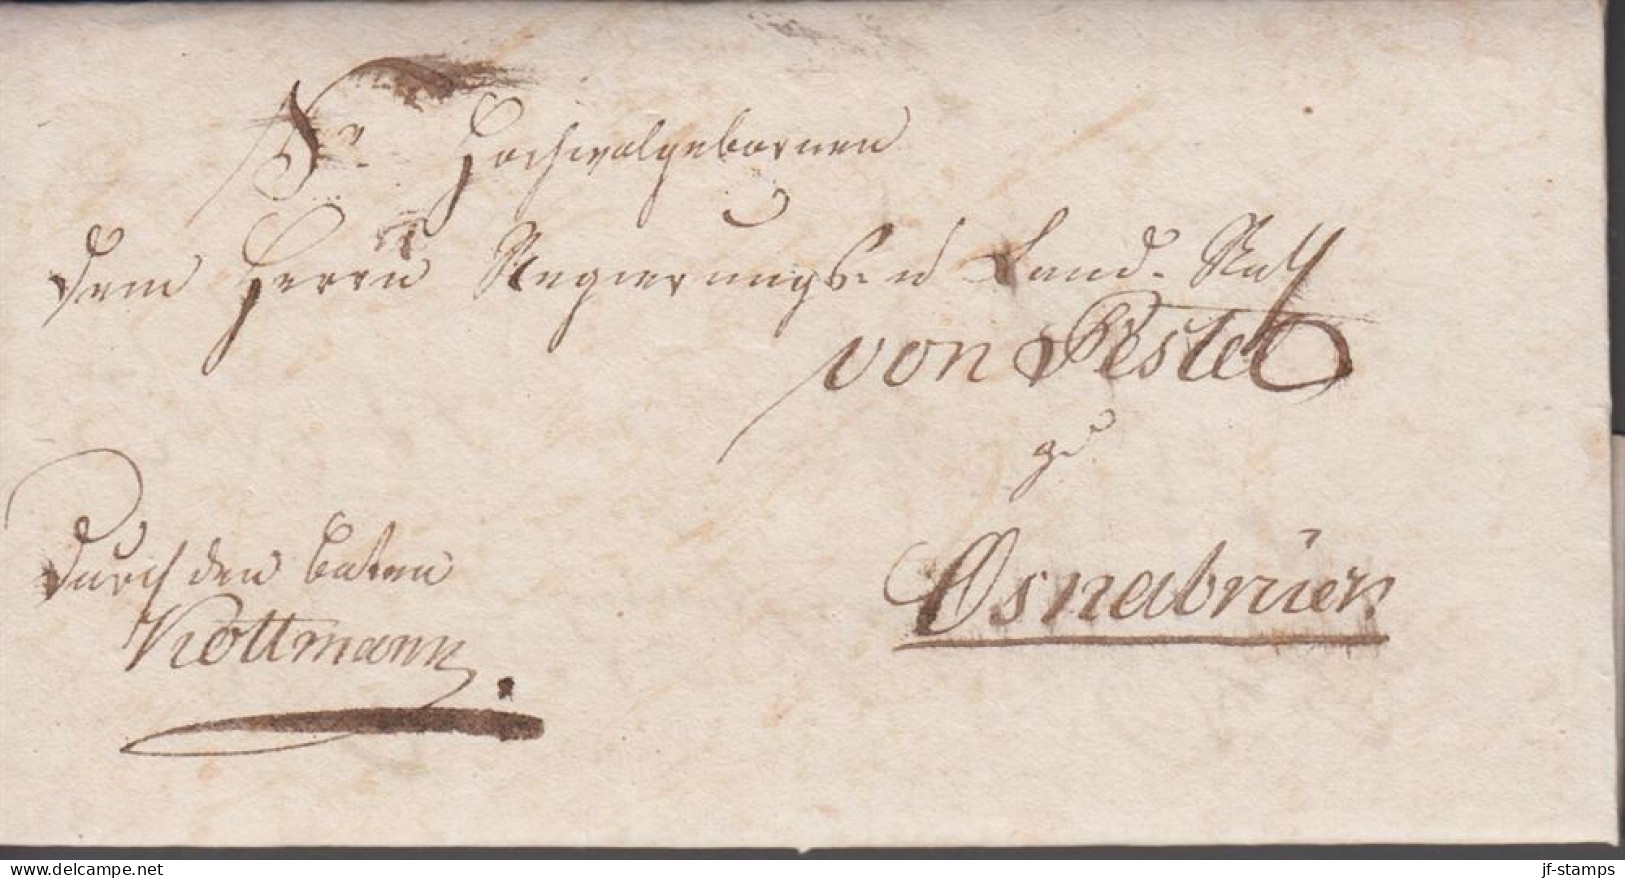 1830. DEUTSCHLAND. Very Interesting And Beautiful Old Double Used Cover. Bruche And Osnabrien.  - JF436620 - Vorphilatelie